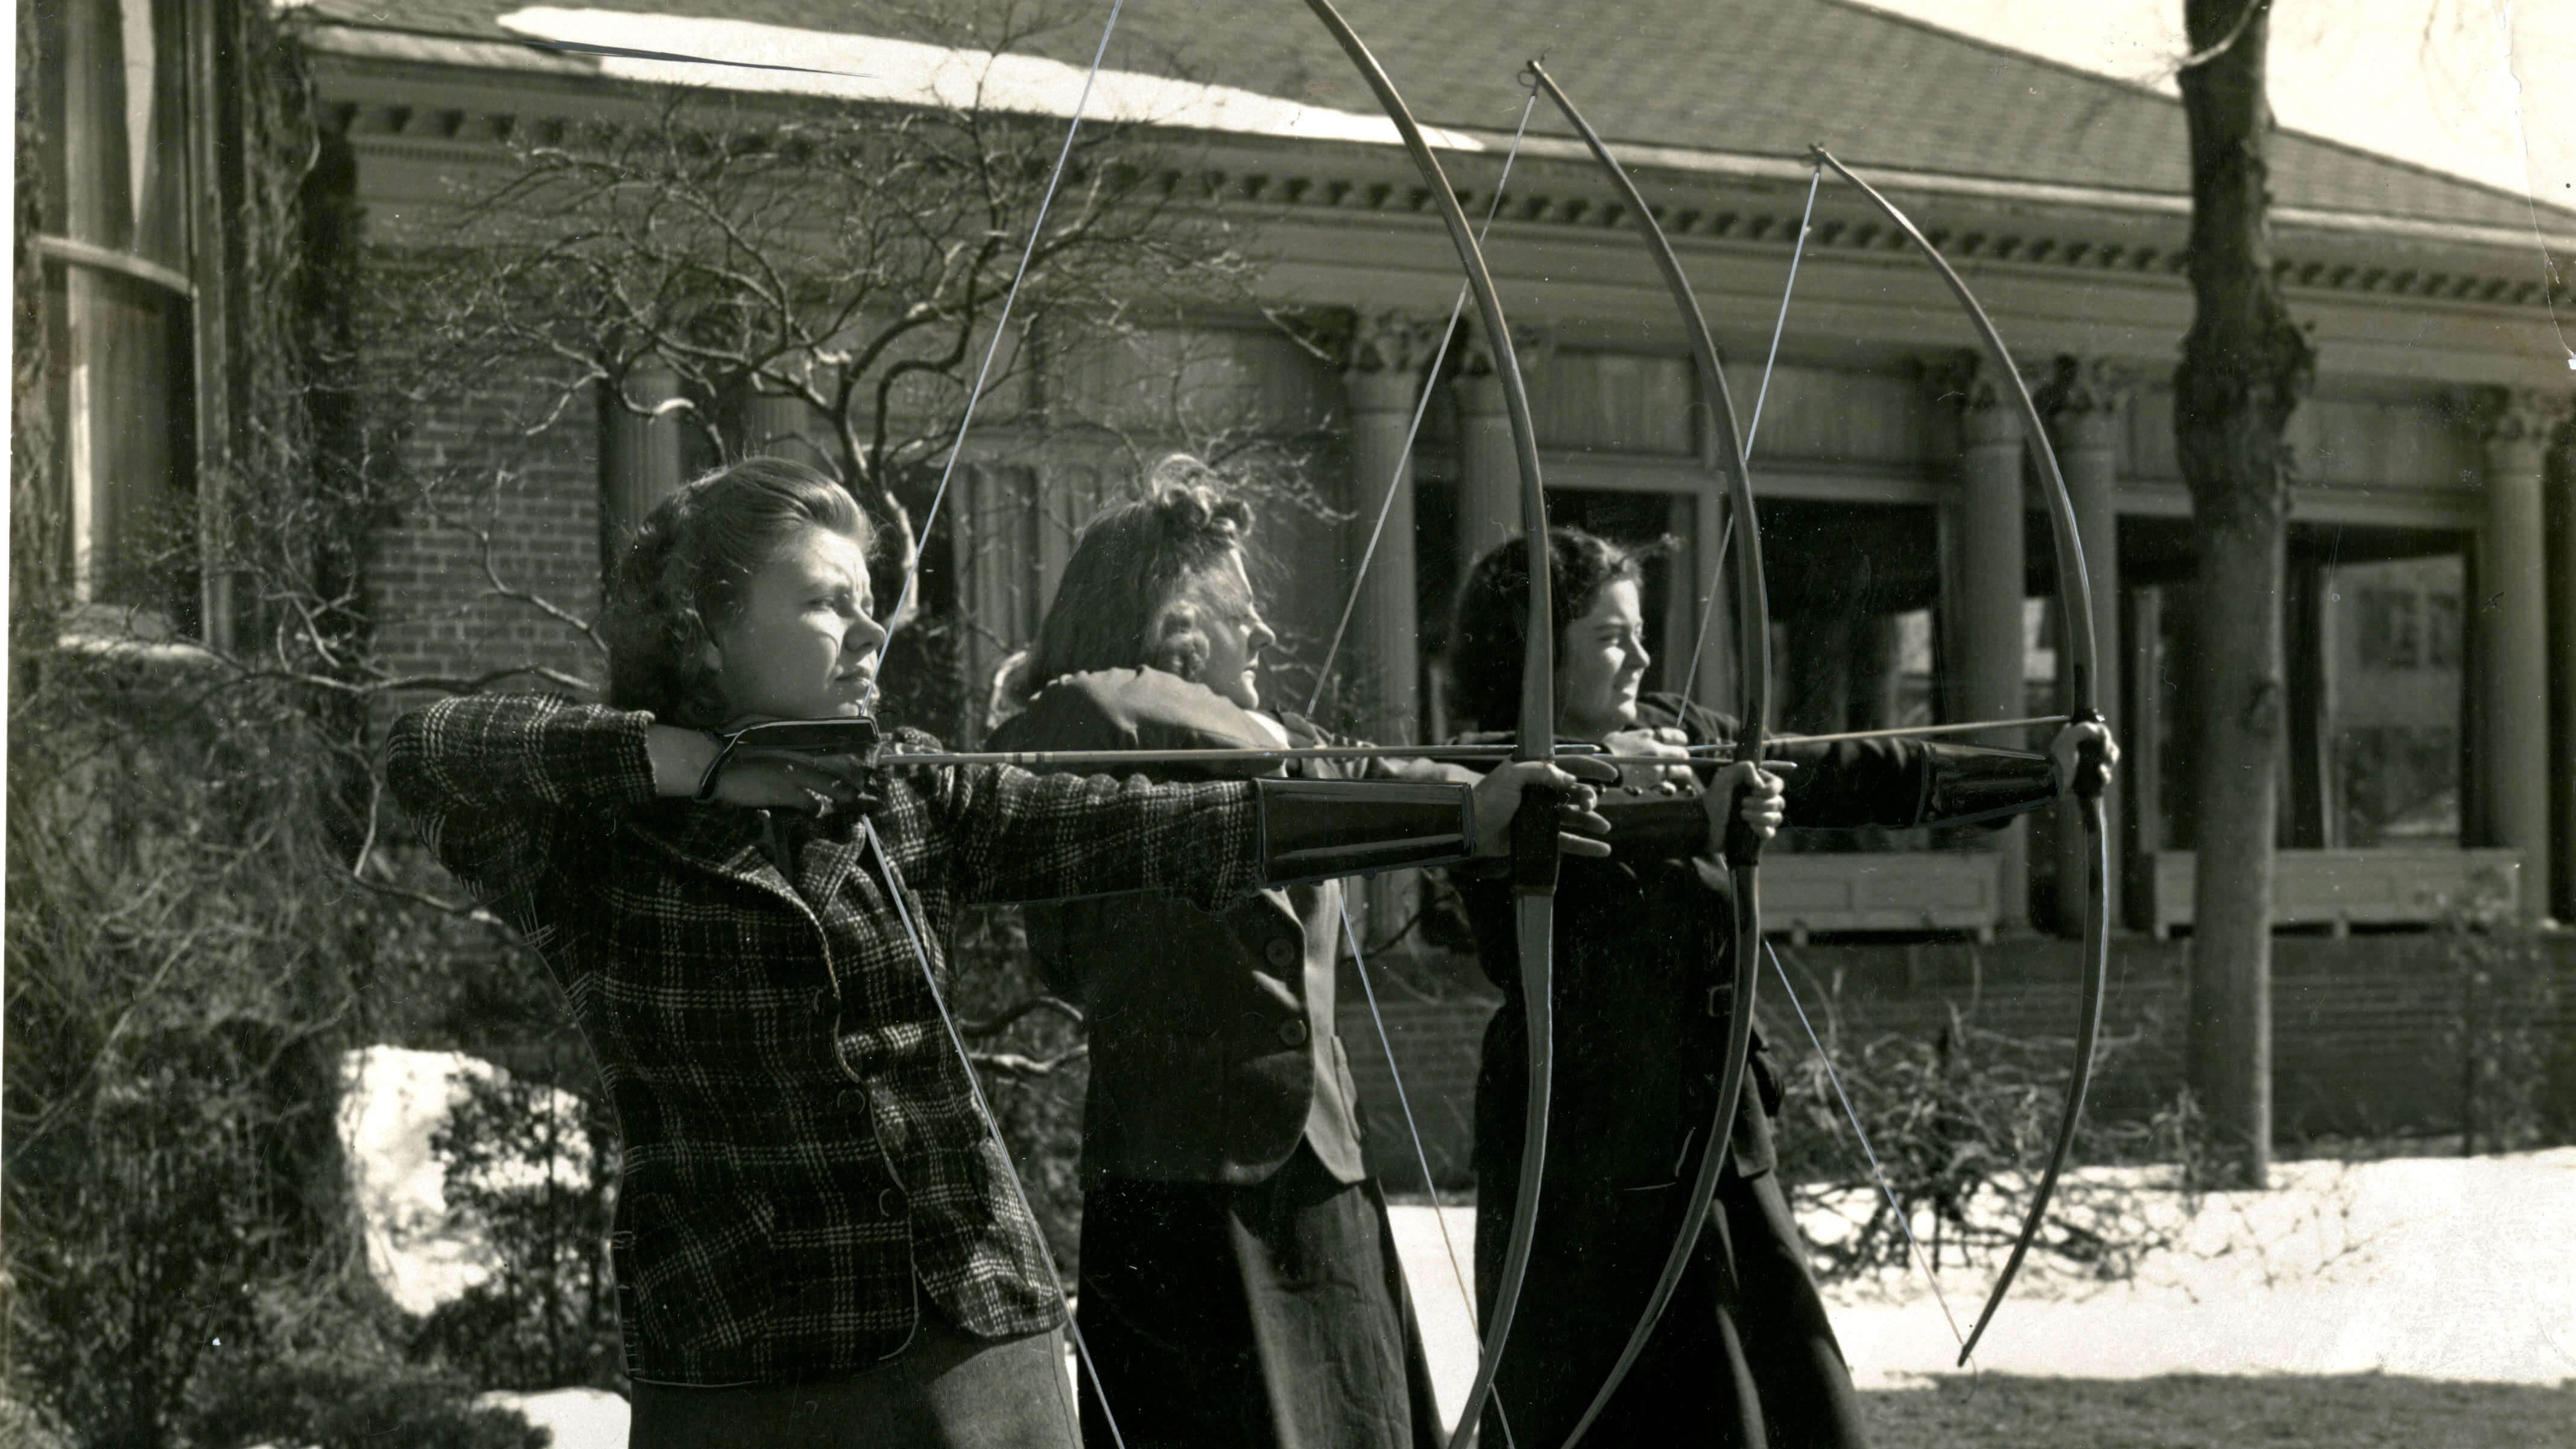 Three women about to release a bow and arrow at the same time